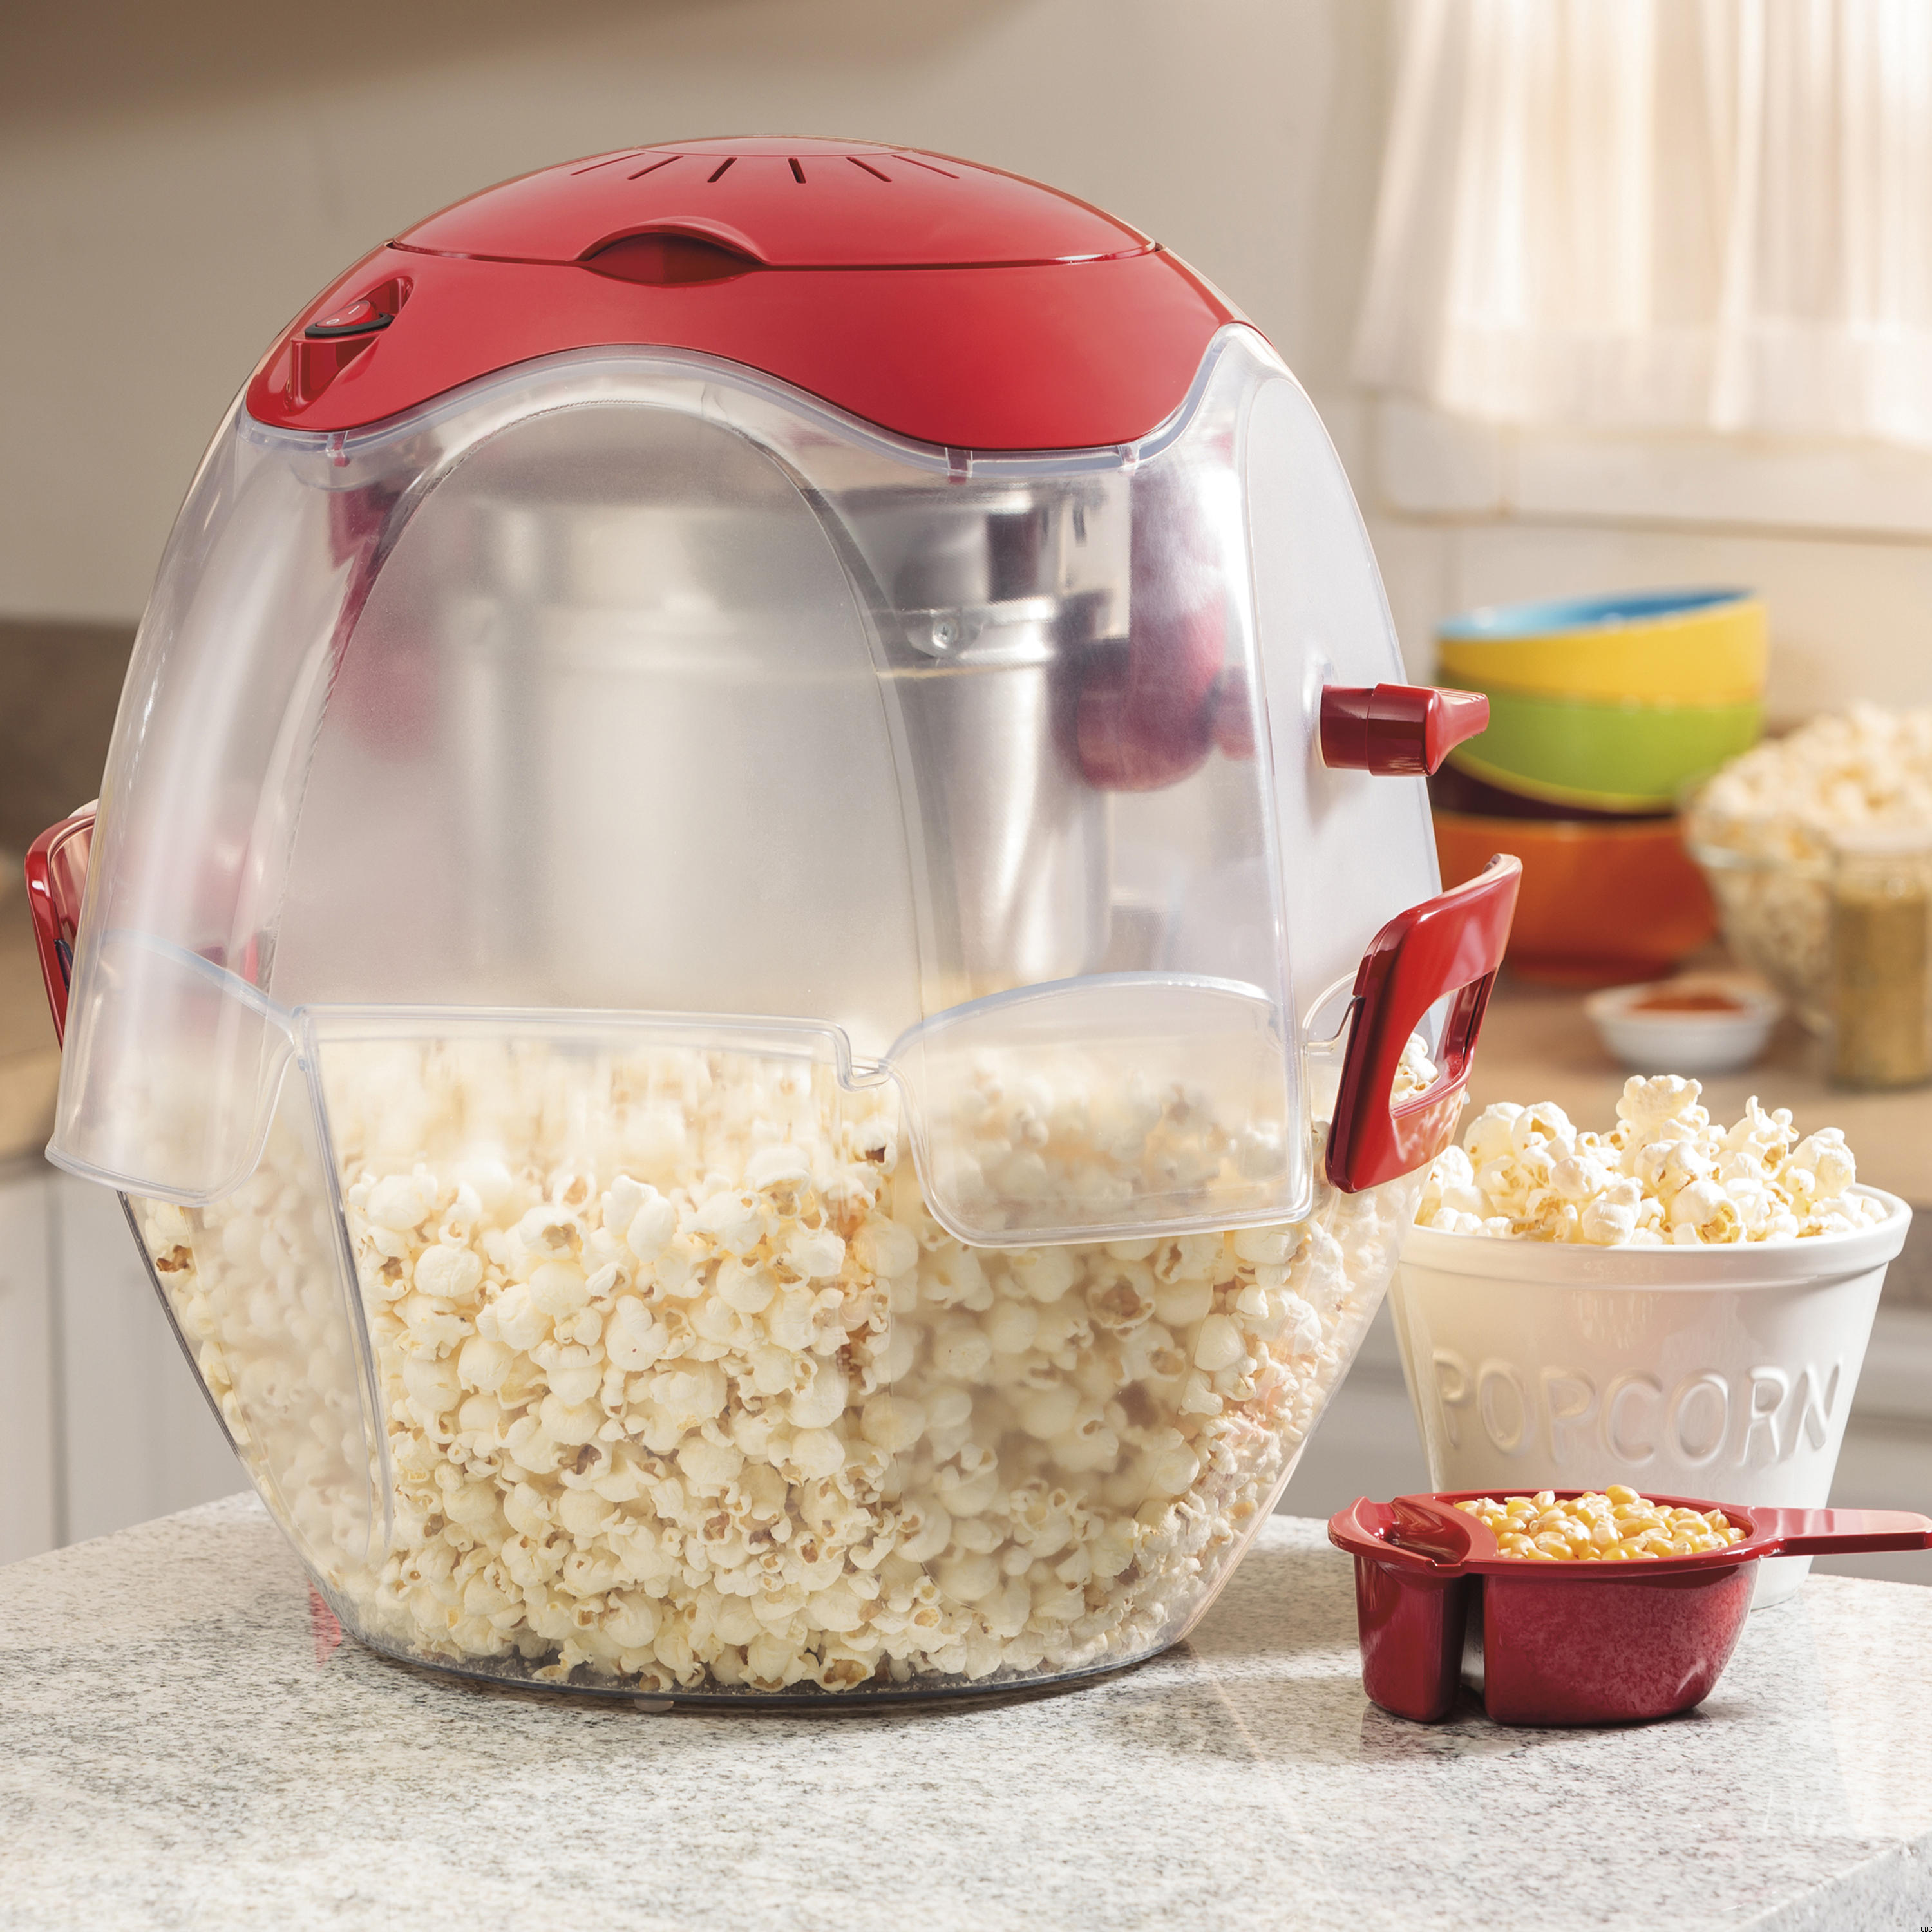 https://9to5toys.com/wp-content/uploads/sites/5/2015/07/hamilton-beach-party-popper-popcorn-maker-in-red-73310-sale-01.jpg